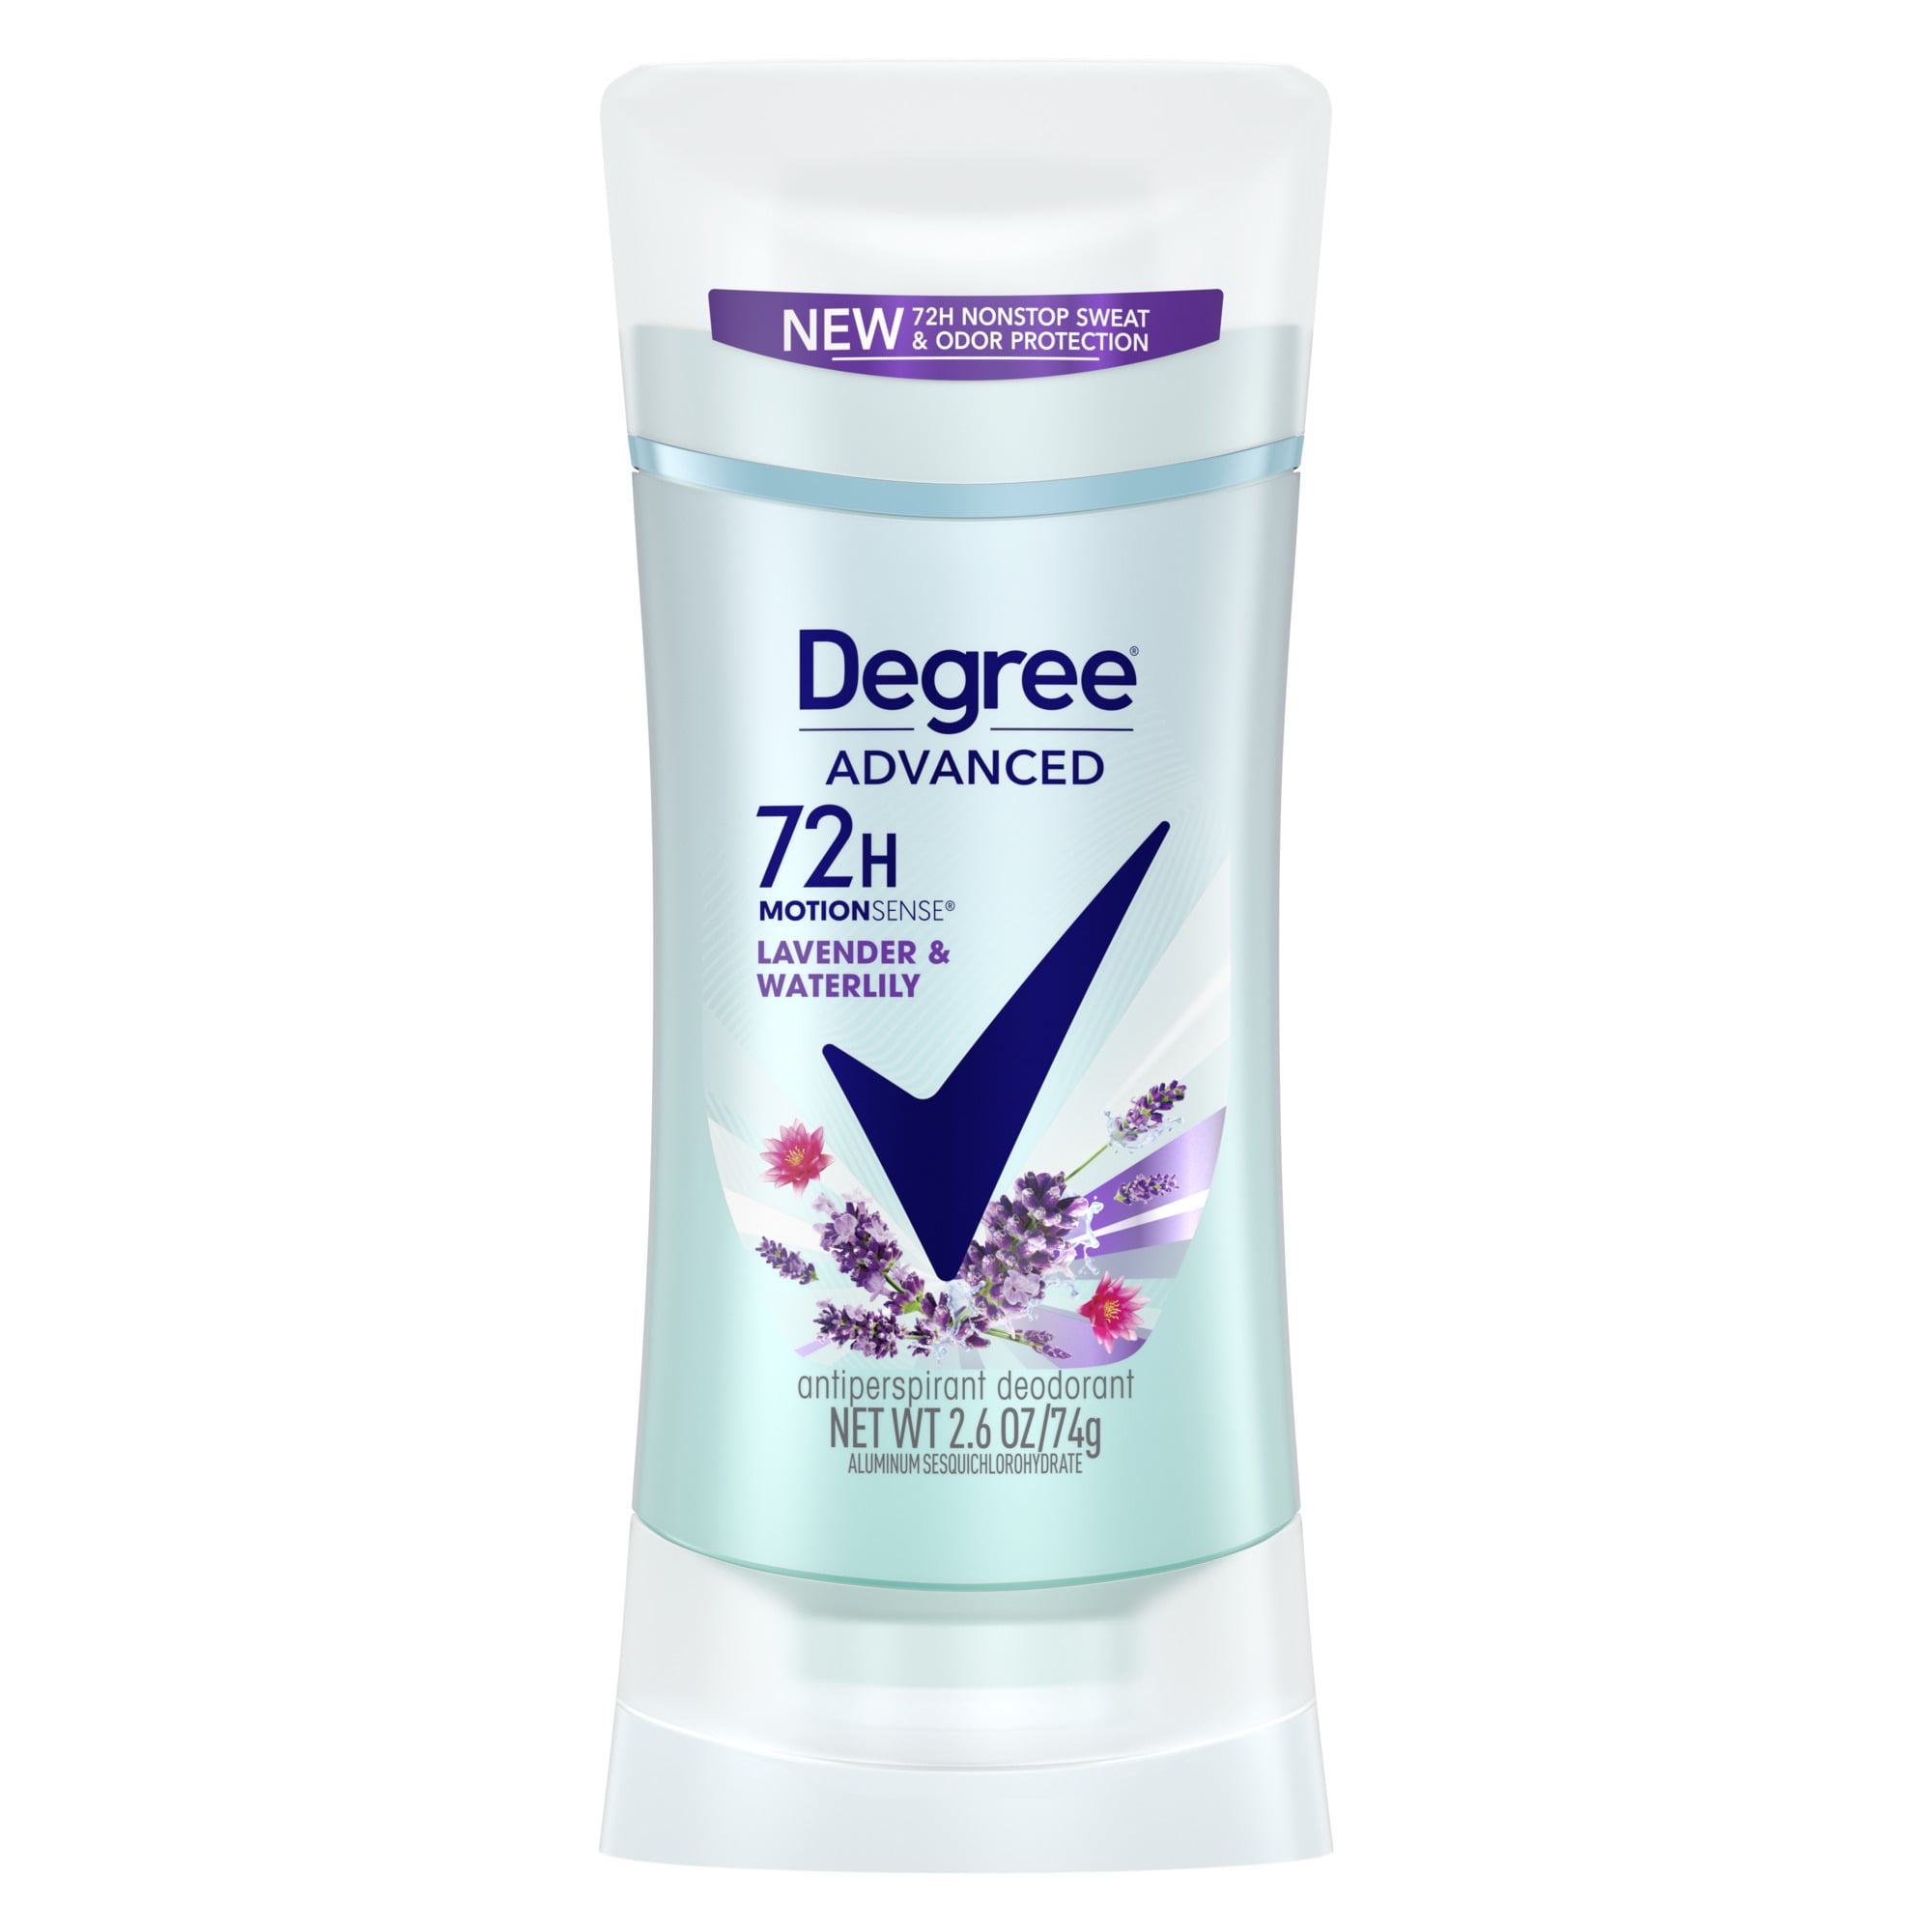 Degree Advanced Long Lasting Women's Antiperspirant Deodorant Stick, Lavender and Waterlily, 2.6 oz - image 1 of 5